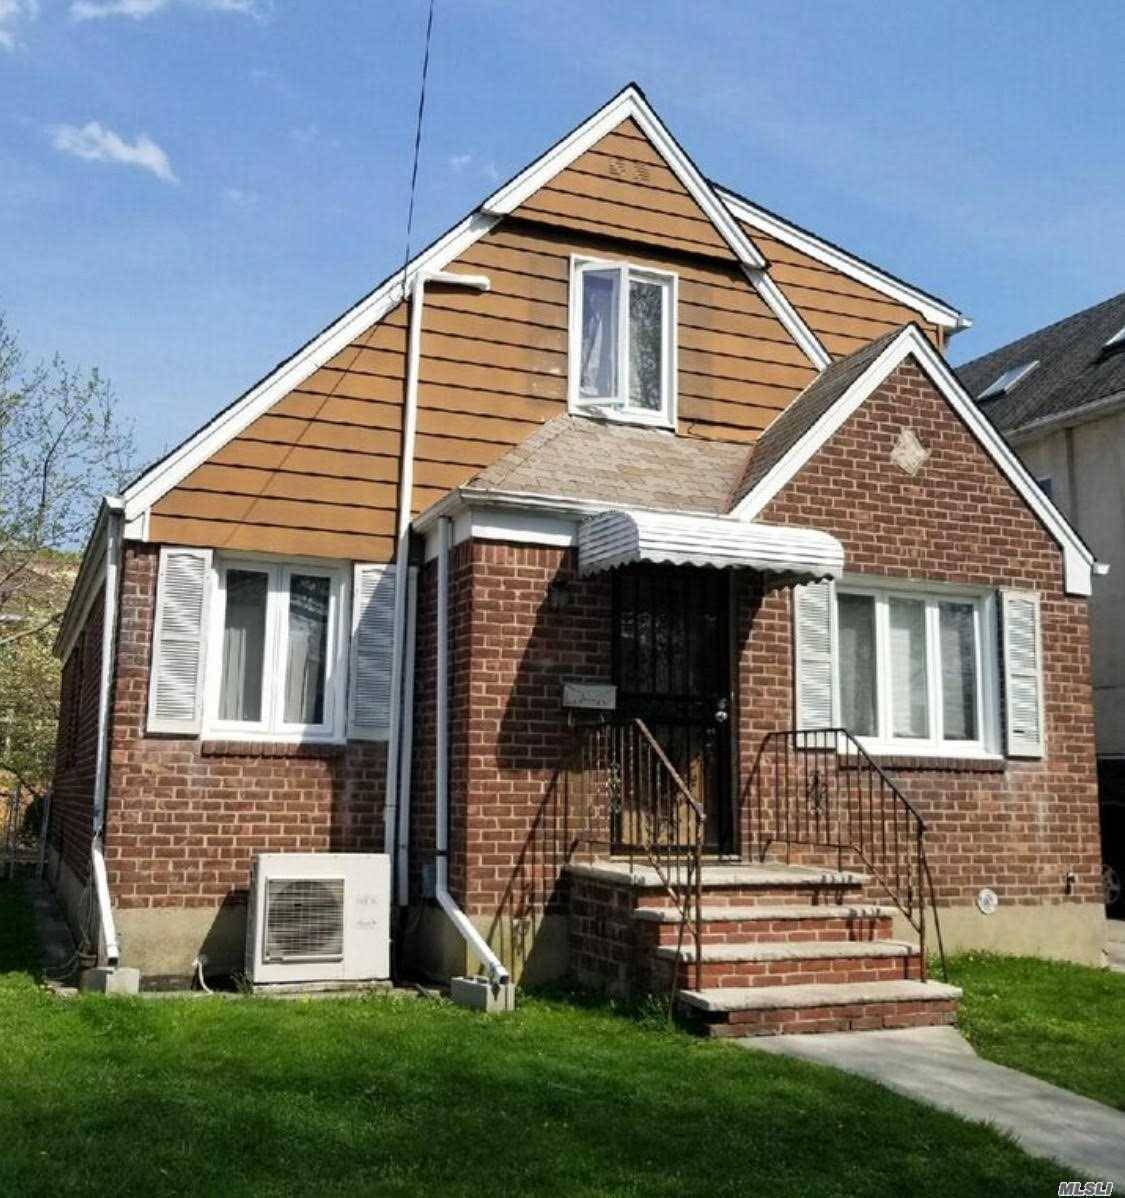 Beautiful Whole House Rental In Fresh Meadows, Offering 5 Bedrms/Huge Custom Walk-In Closet, 2 Full Baths, Large Bright Living Rm, Granite Counter Top Kitchen & Stainless Steal Appliances, A Lot Of Storage Space, Full Finished Basement